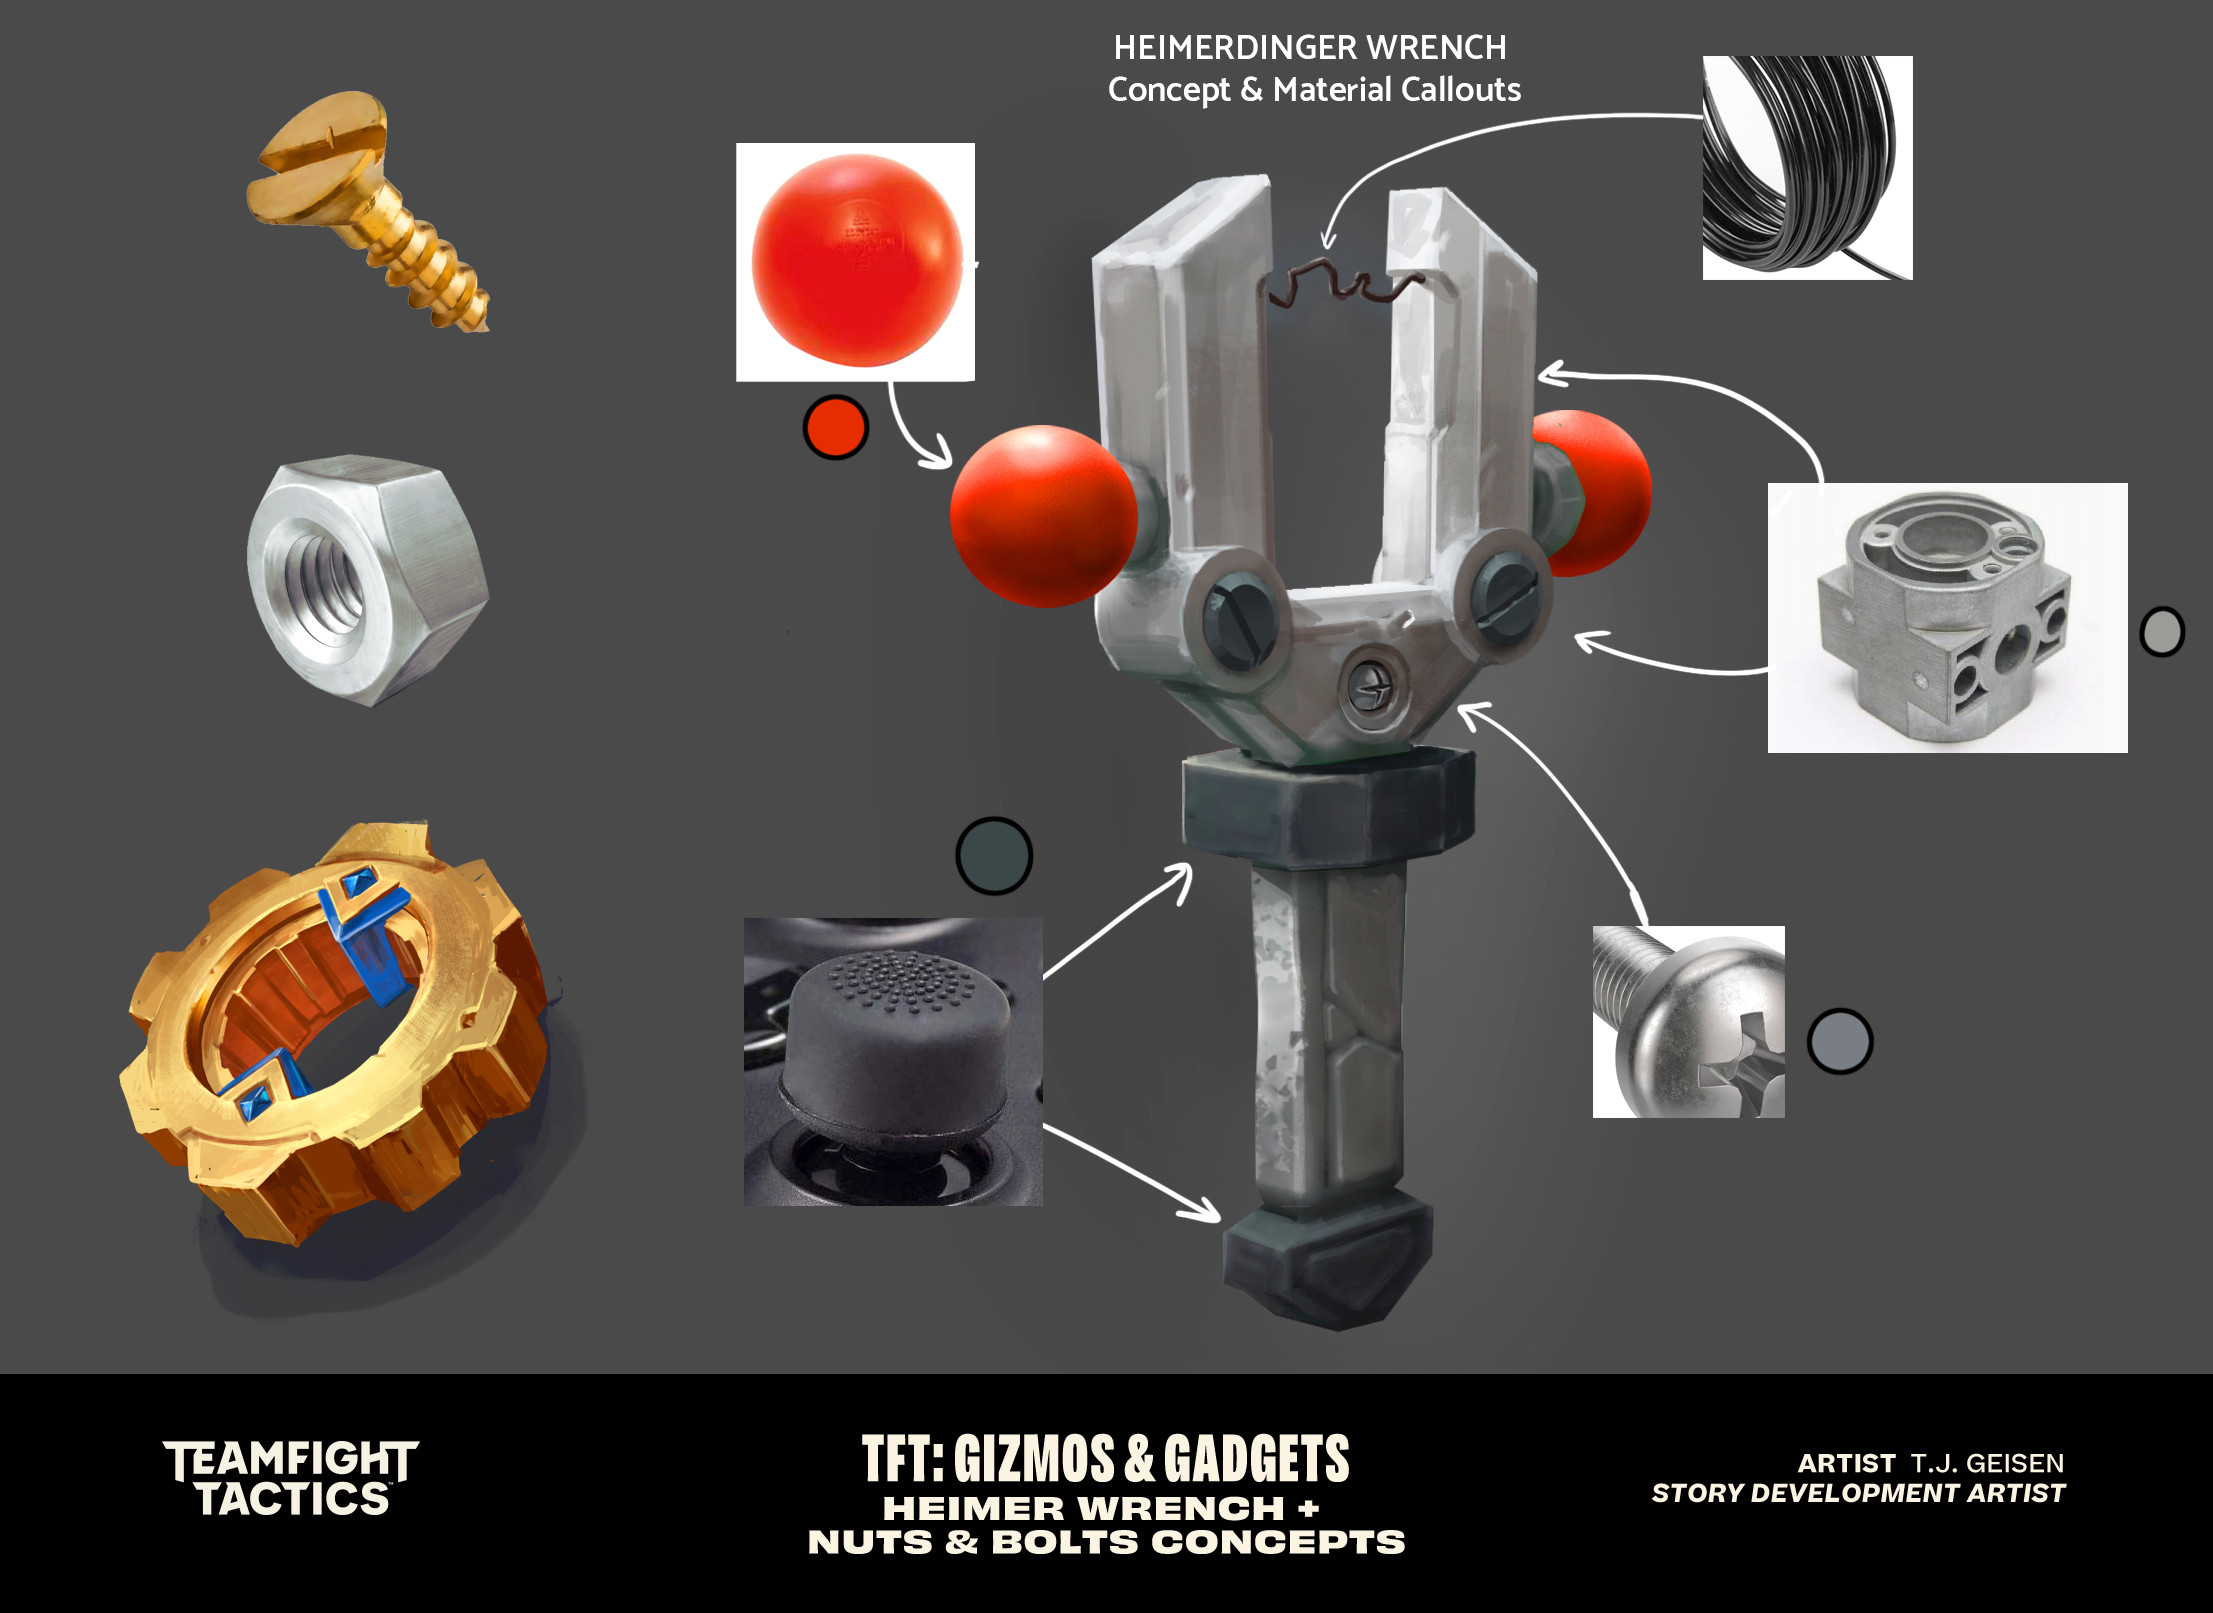 Heimer Wrench props designed for the set cinematic. Not all concept work is glamorous. :D